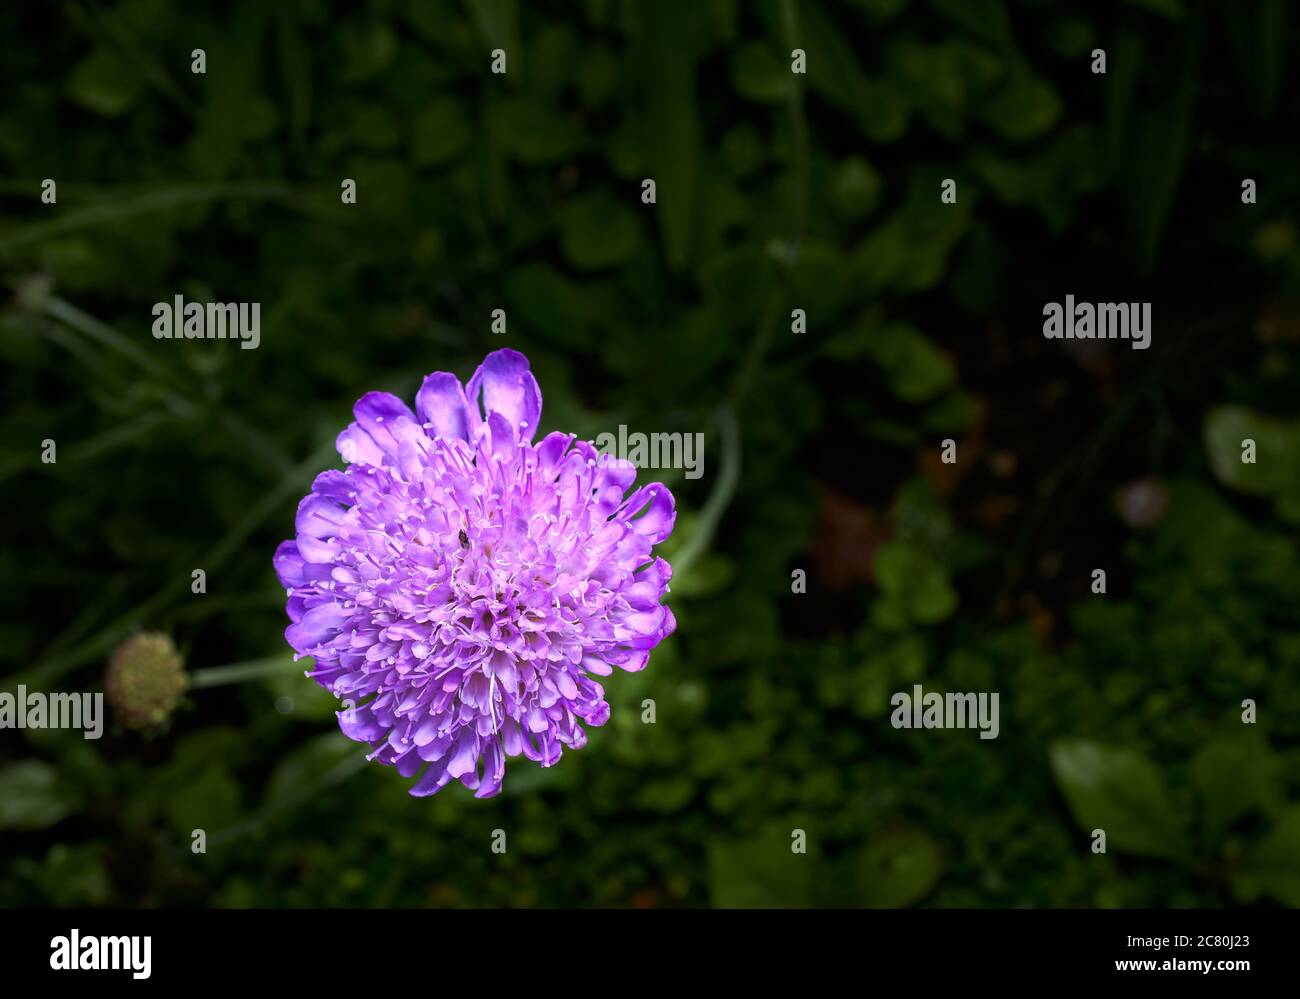 Violet coloured flower of the Field Scabious (knautia arvensis) plant. Stock Photo